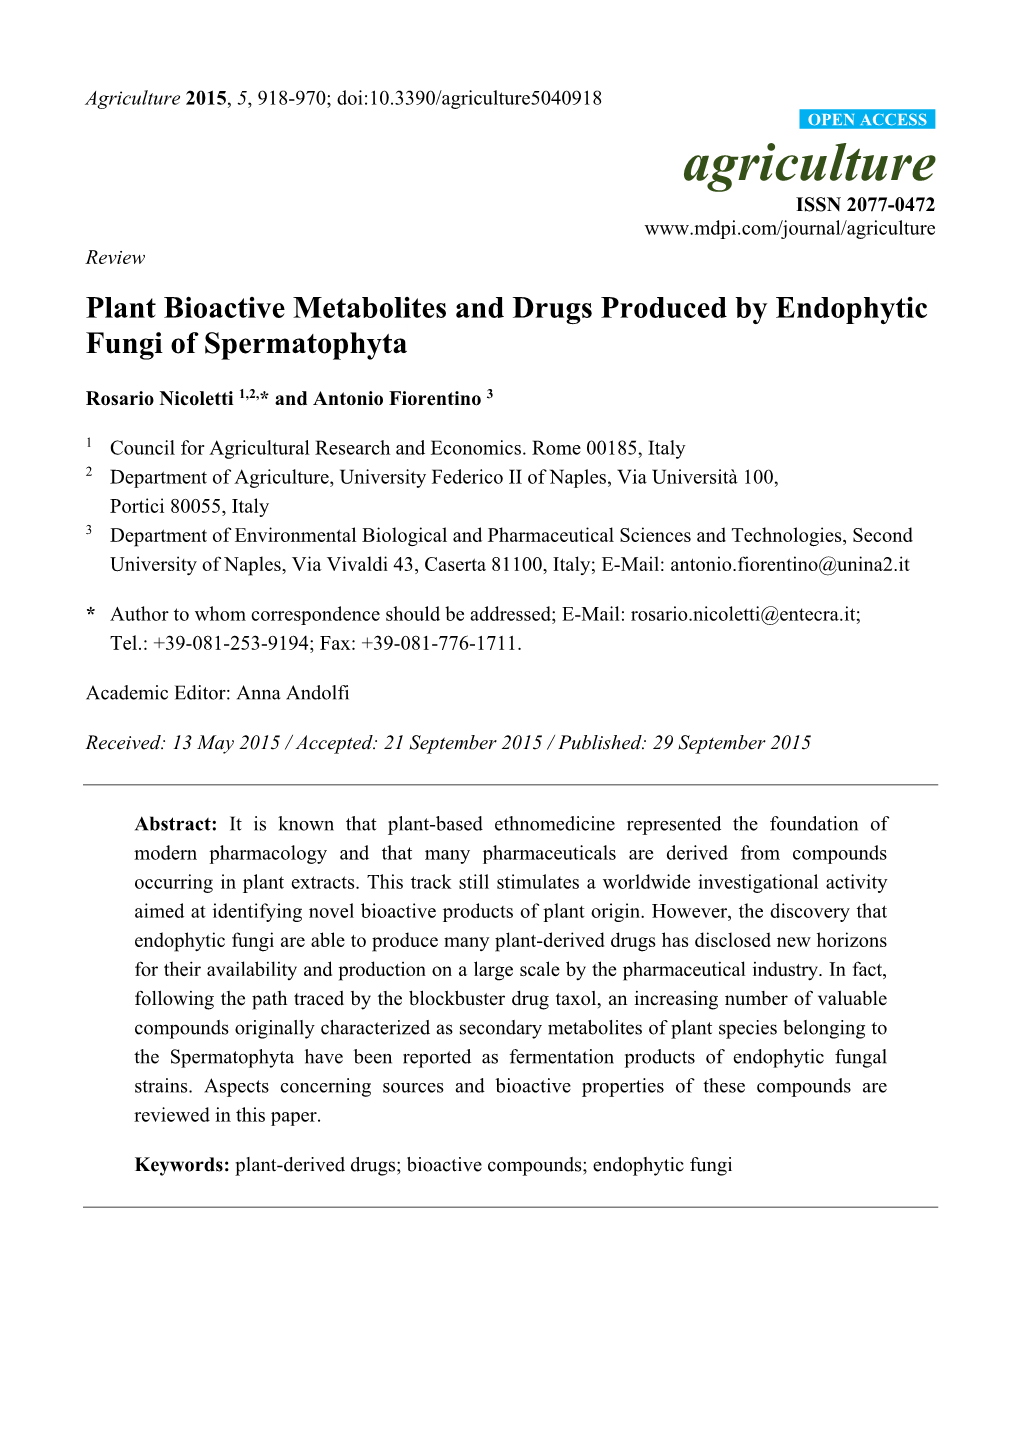 Plant Bioactive Metabolites and Drugs Produced by Endophytic Fungi of Spermatophyta